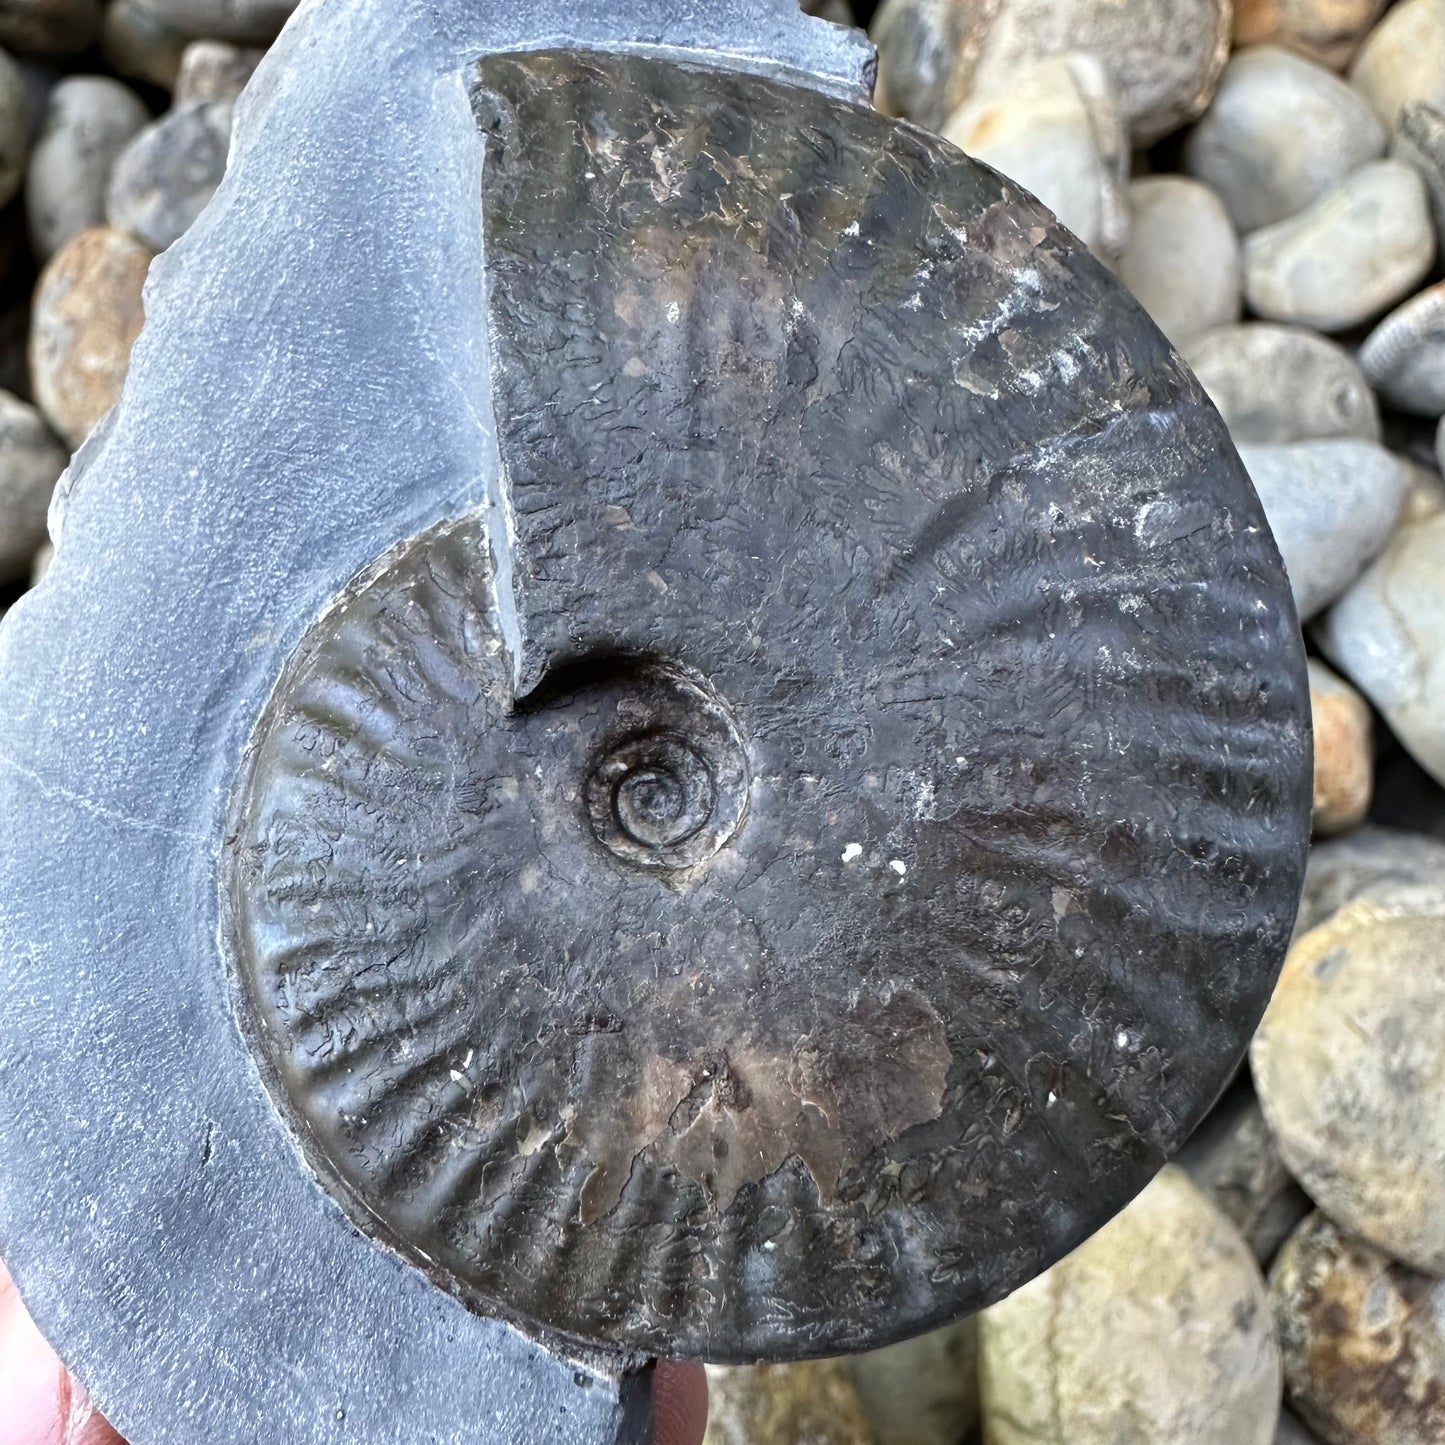 Pseudolioceras boulbiense ammonite fossil - Whitby, North Yorkshire Jurassic Coast, Yorkshire fossils